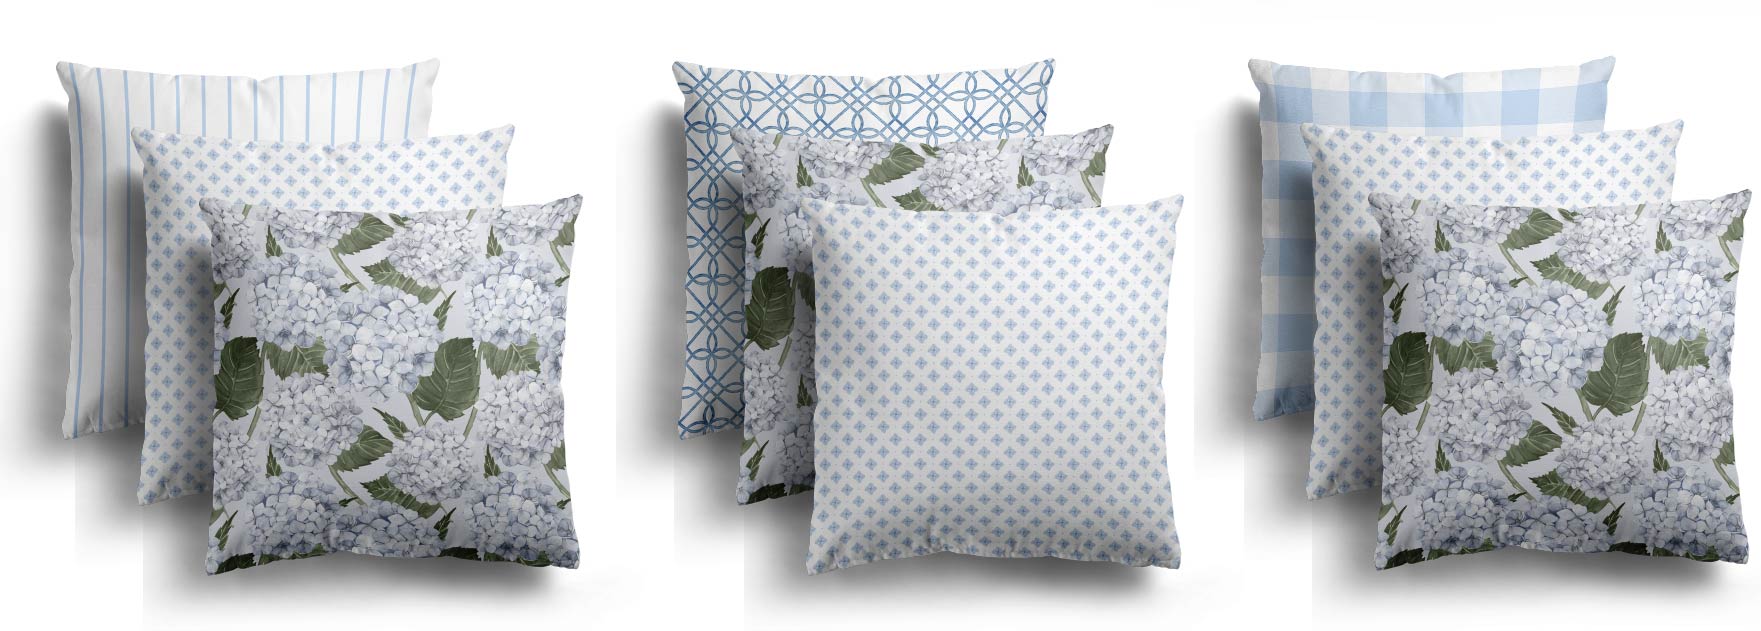 How to Mix and Match Patterns - Hydrangea Lane Home